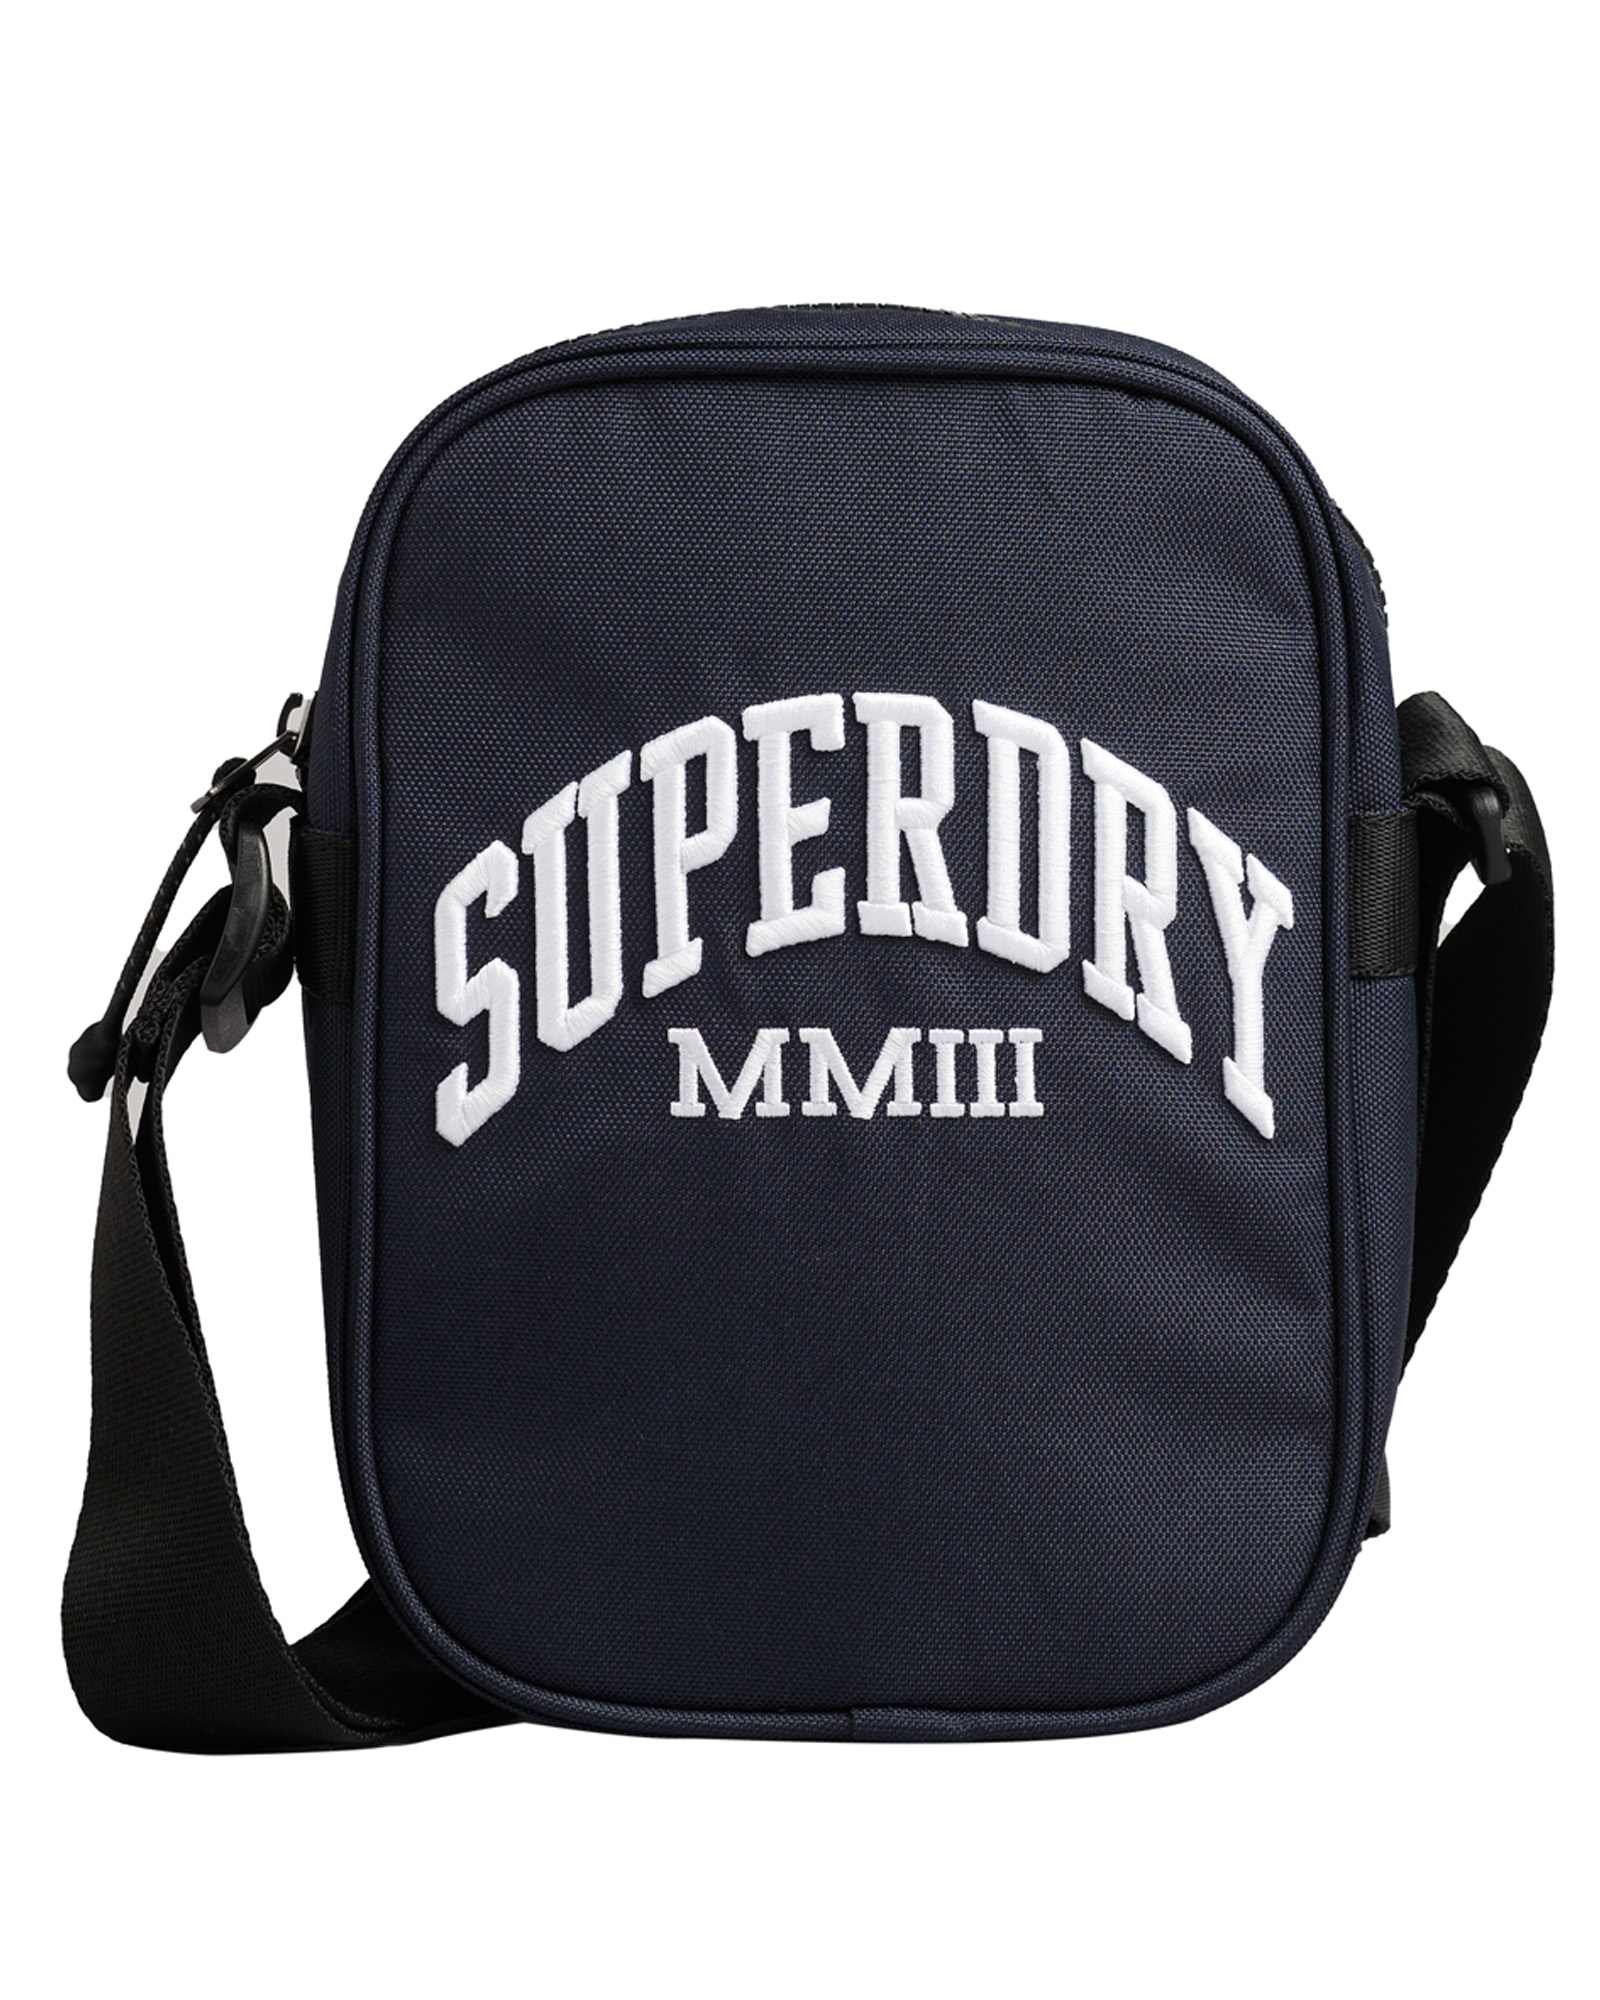 New Mens Superdry Black Lineman Sport Pouch Polyester Cross Body Bag Bags 